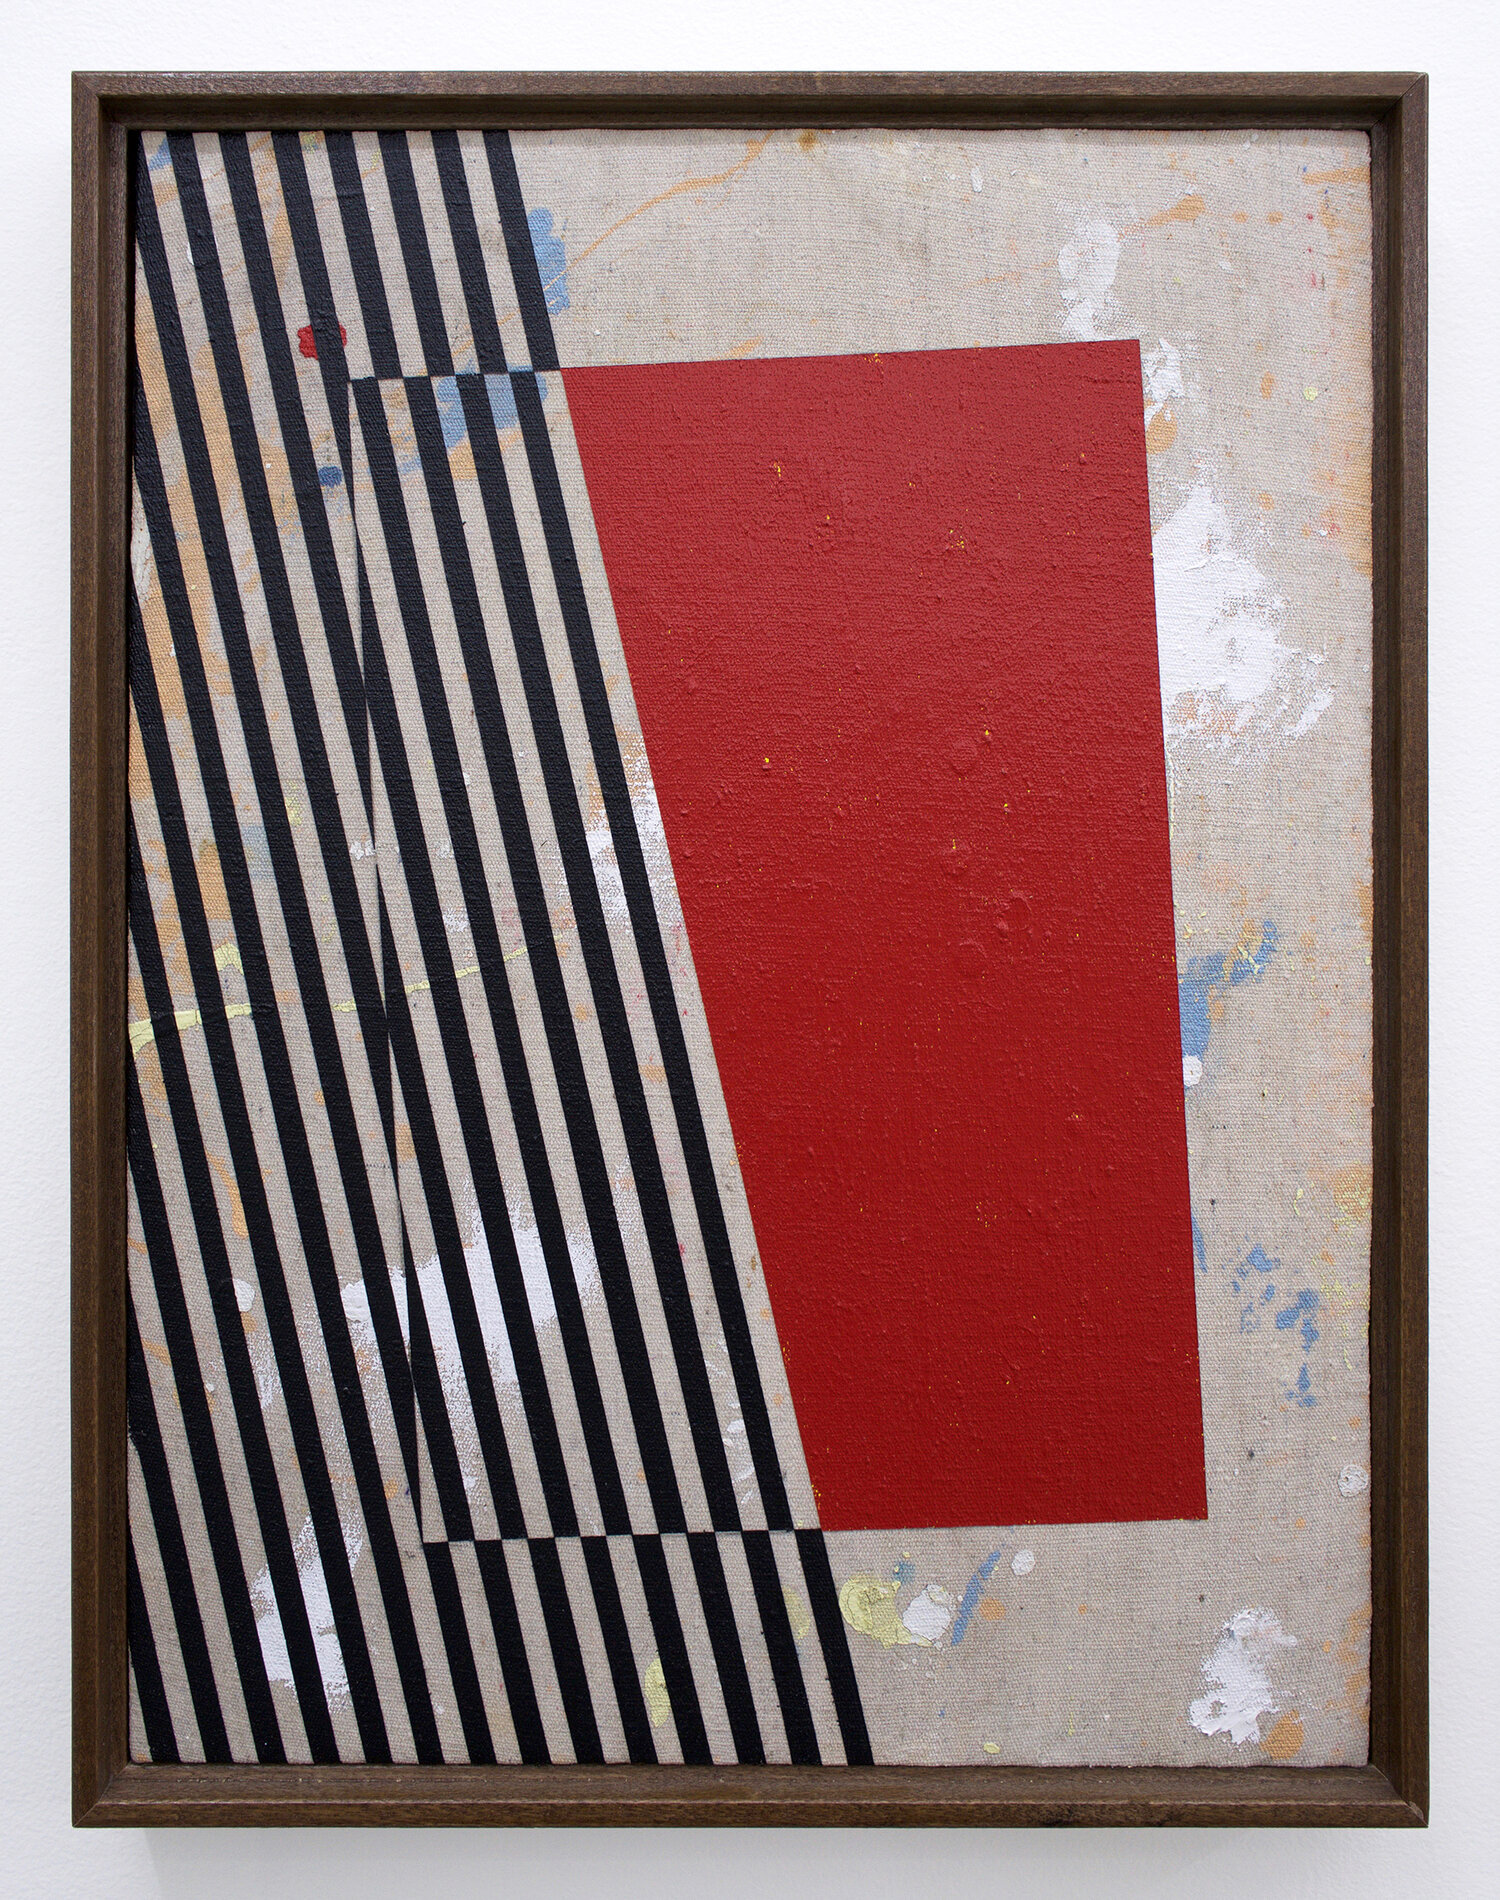  JOHNNY ABRAHAMS Untitled (Small Red), 2019 acrylic on canvas, 17” x 13” (framed) 